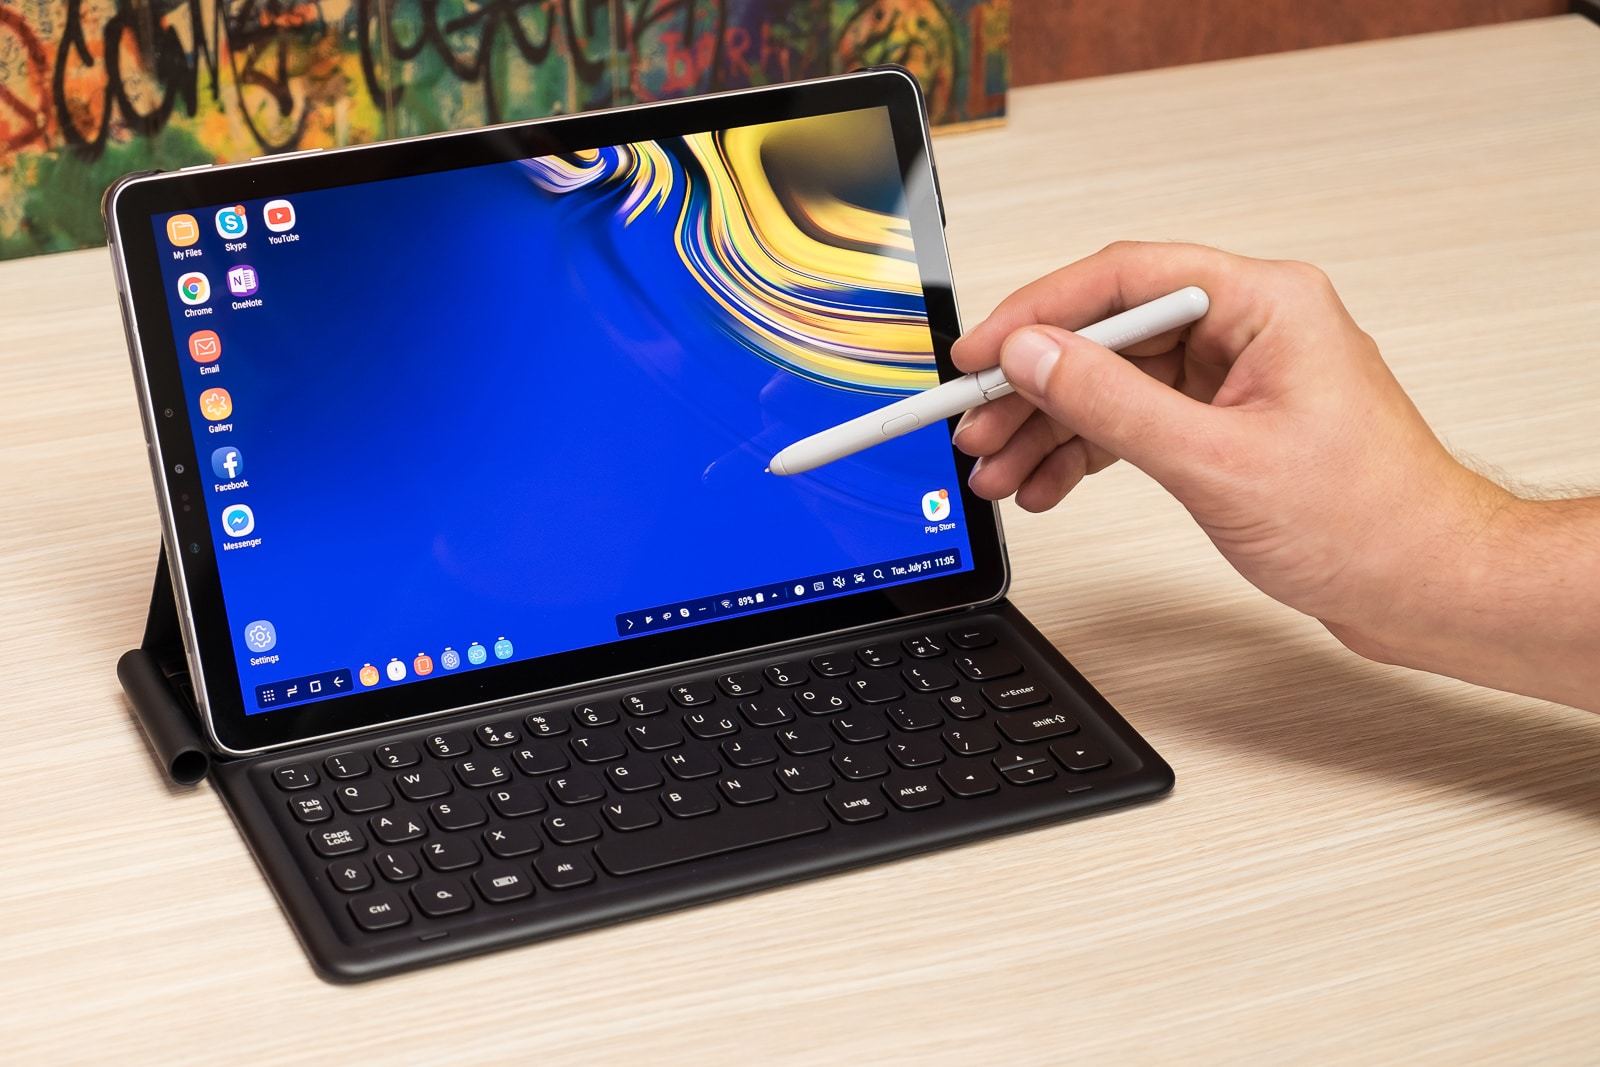 Last year's Samsung Galaxy Tab S4 - Here's every Samsung smartwatch and tablet launching later this year